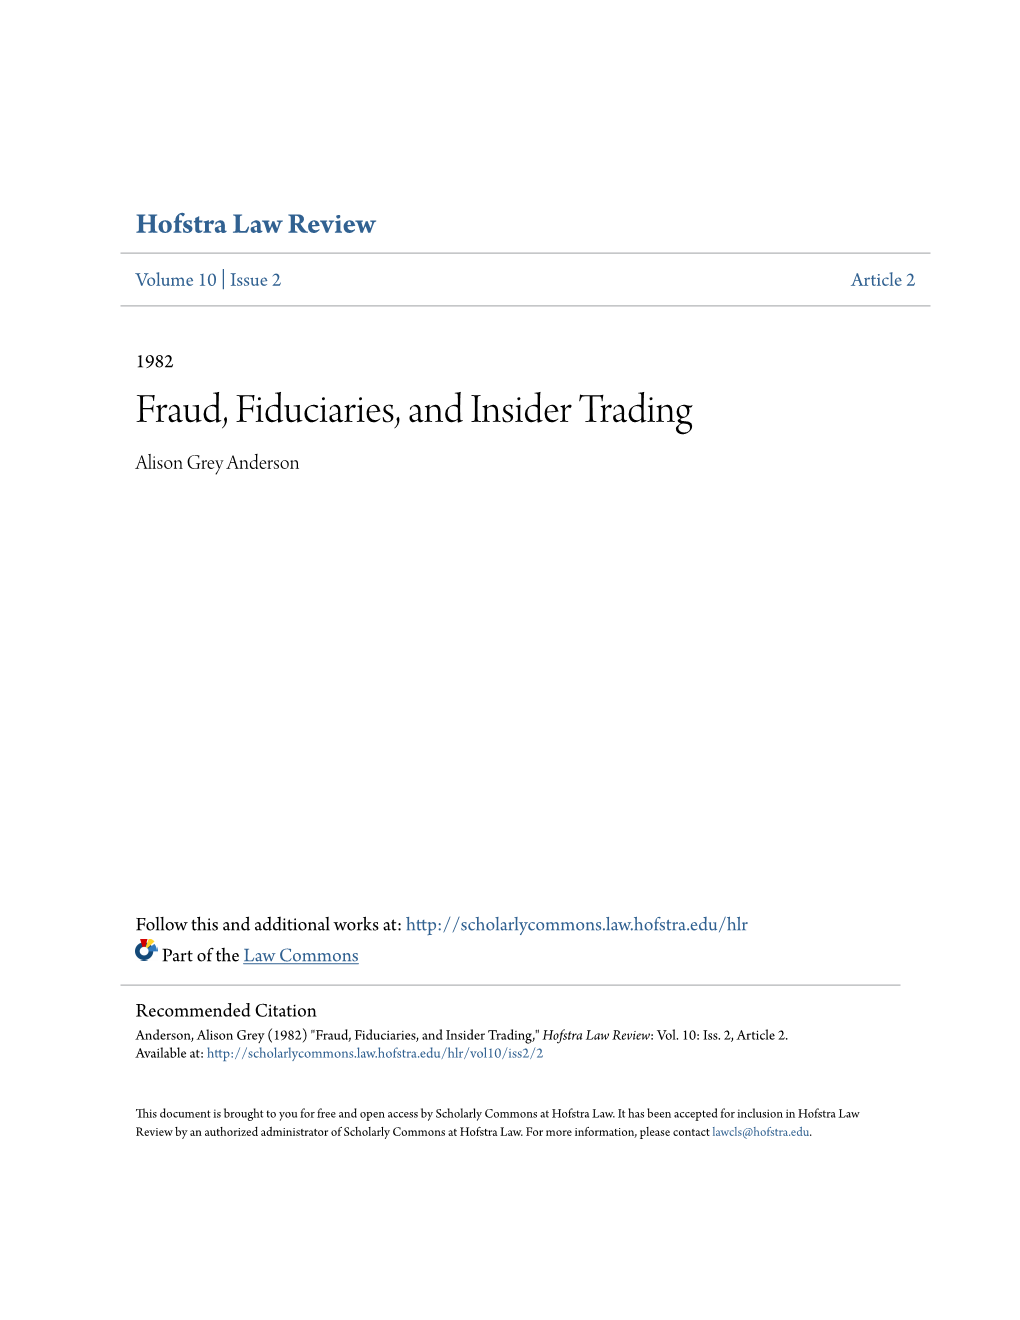 Fraud, Fiduciaries, and Insider Trading Alison Grey Anderson